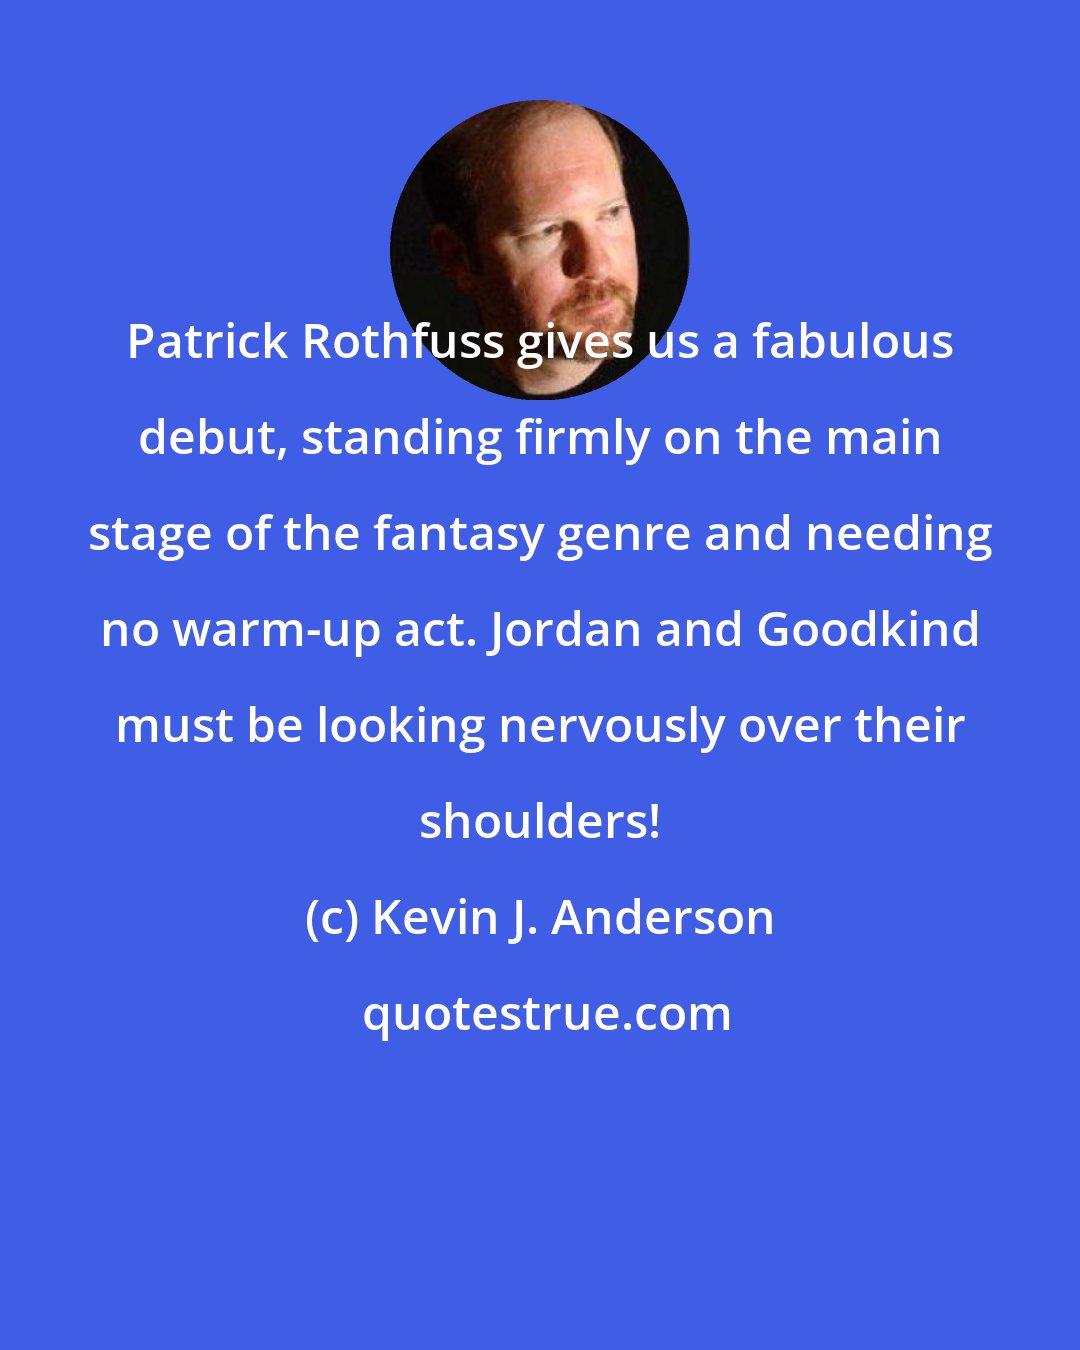 Kevin J. Anderson: Patrick Rothfuss gives us a fabulous debut, standing firmly on the main stage of the fantasy genre and needing no warm-up act. Jordan and Goodkind must be looking nervously over their shoulders!